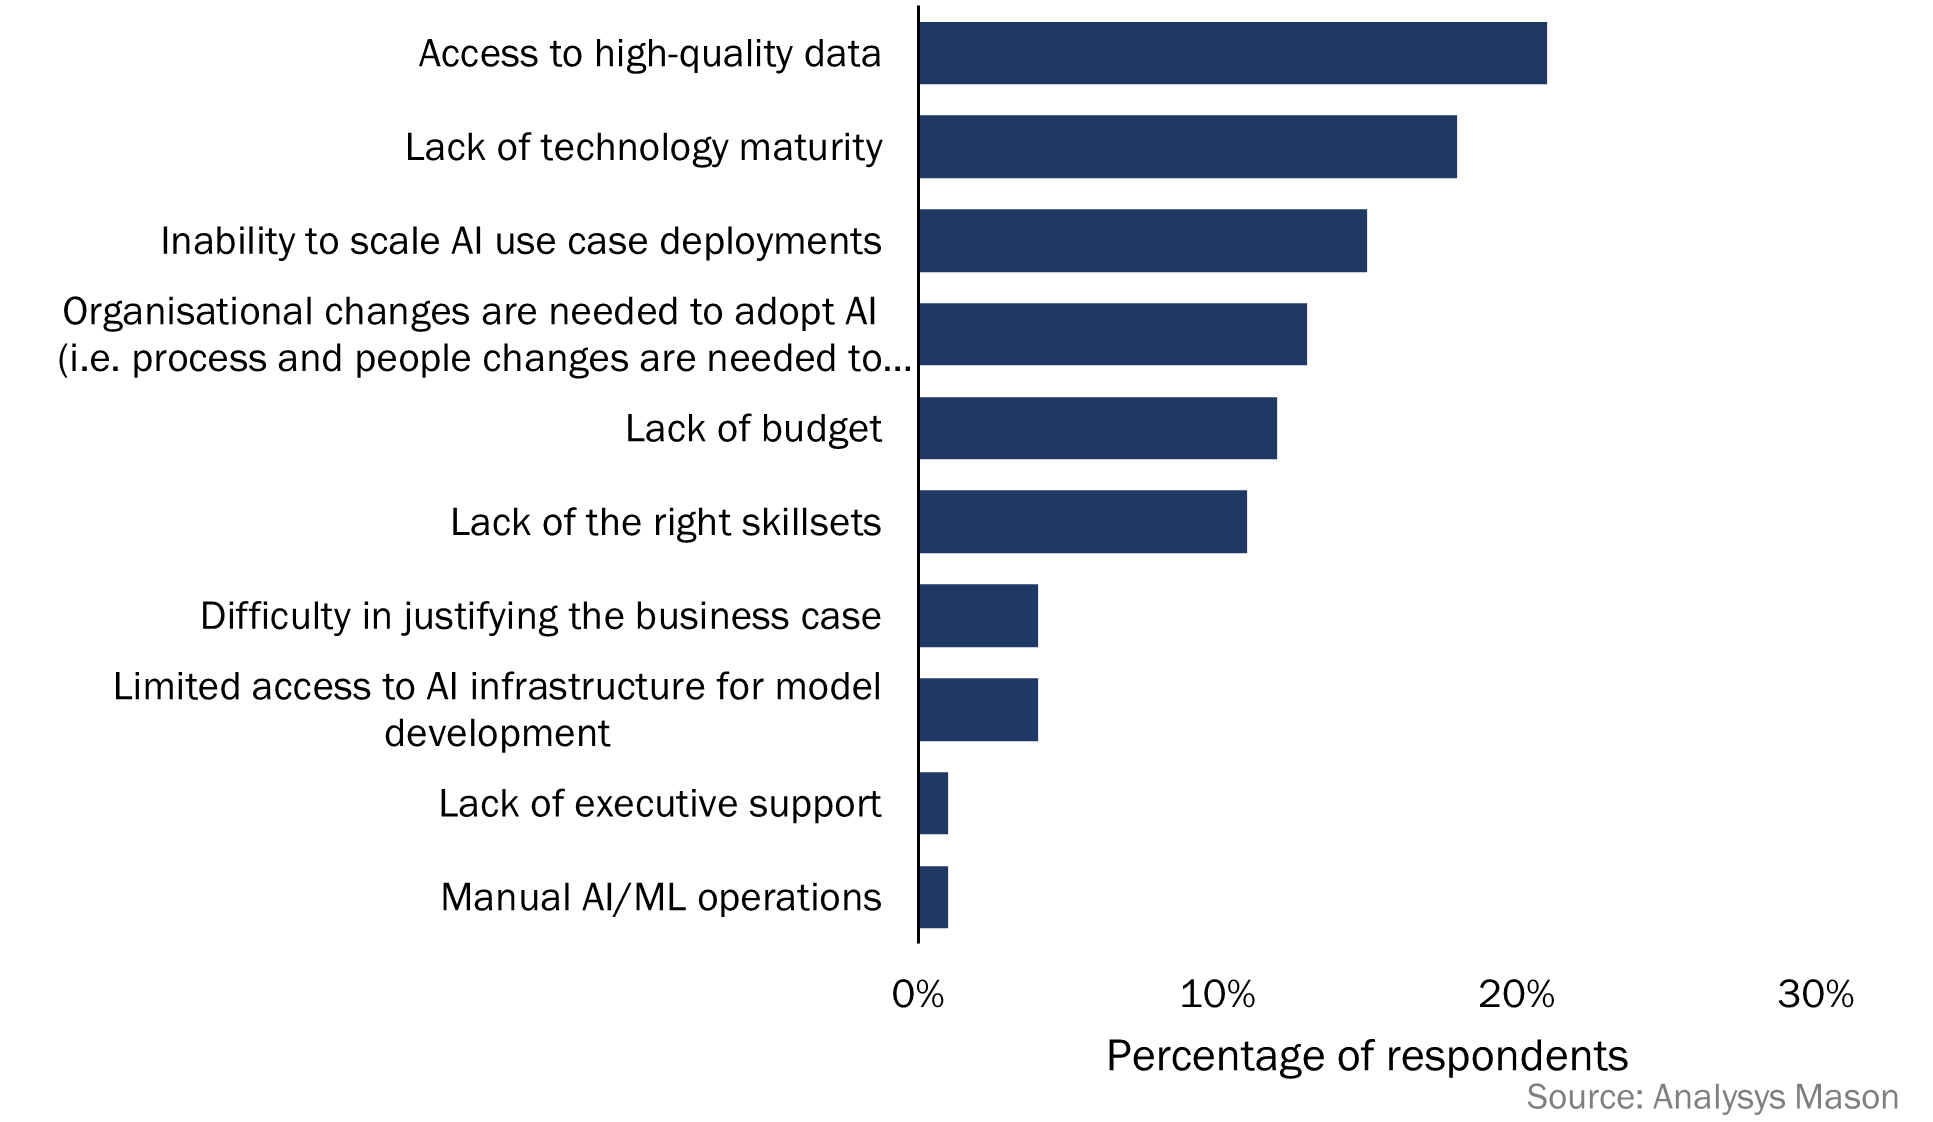 Figure 1: Common challenges that CSPs face with telecoms-related AI projects (based on Analysys Mason’s survey of 84 CSPs worldwide, conducted between September and November 2022)